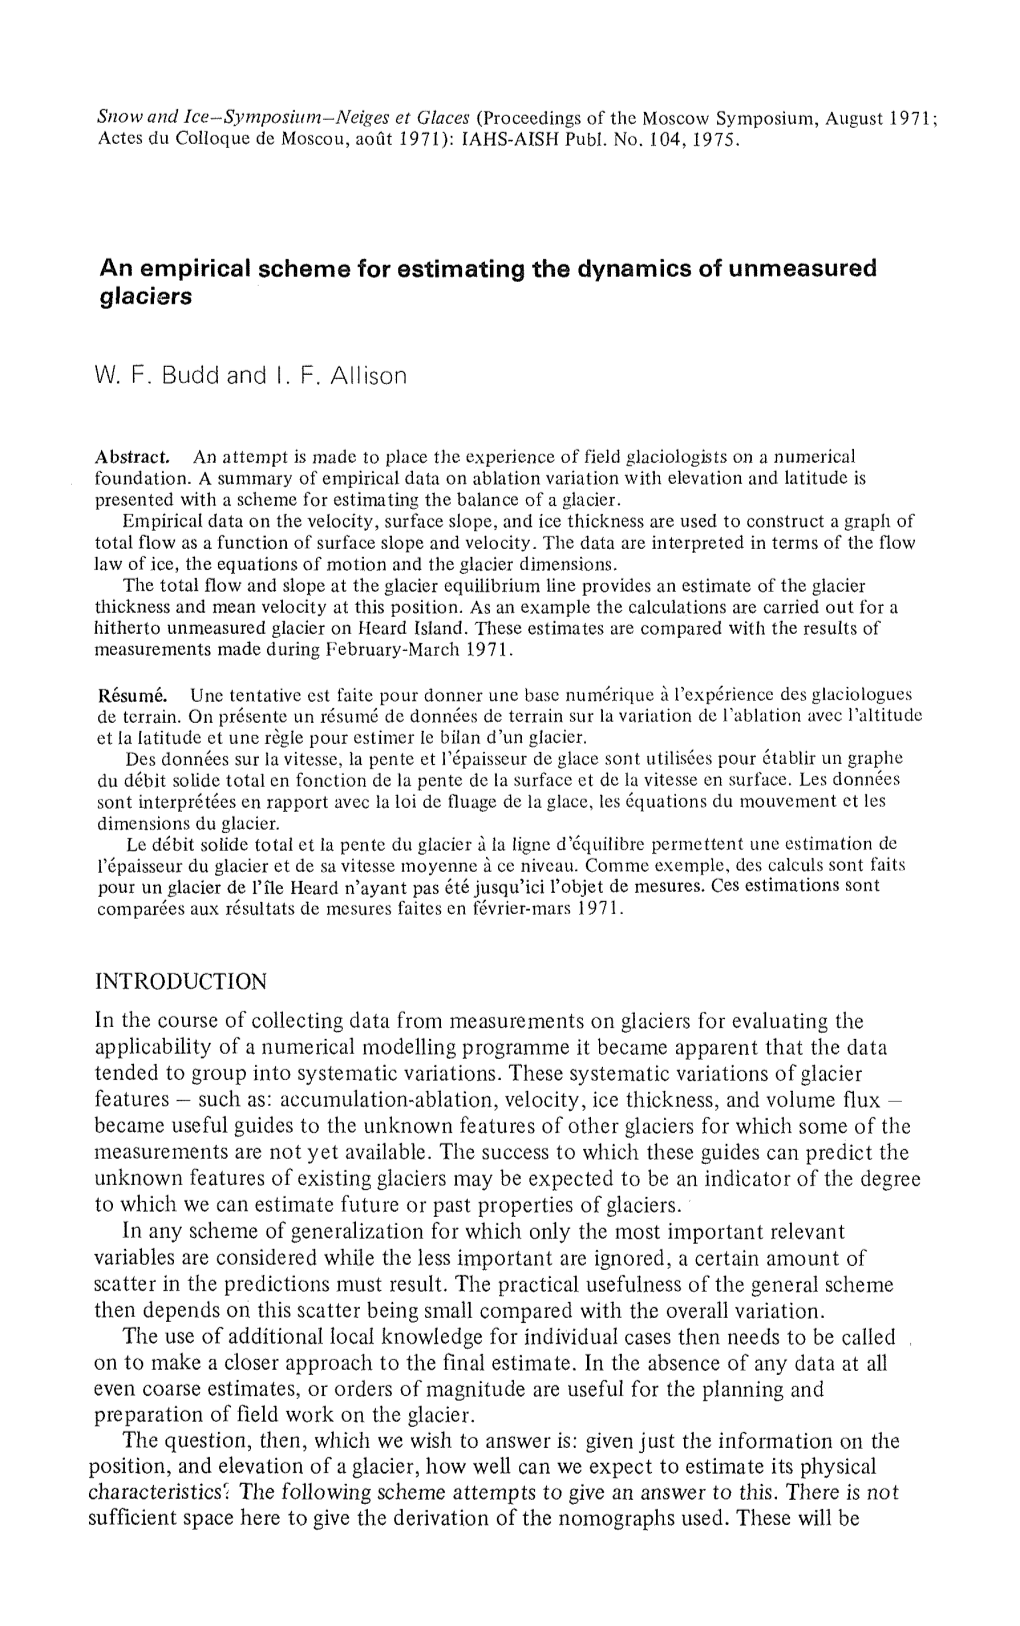 An Empirical Scheme for Estimating the Dynamics of Unmeasured Glaciers W. F. Budd and I. F. Allison INTRODUCTION in the Course O